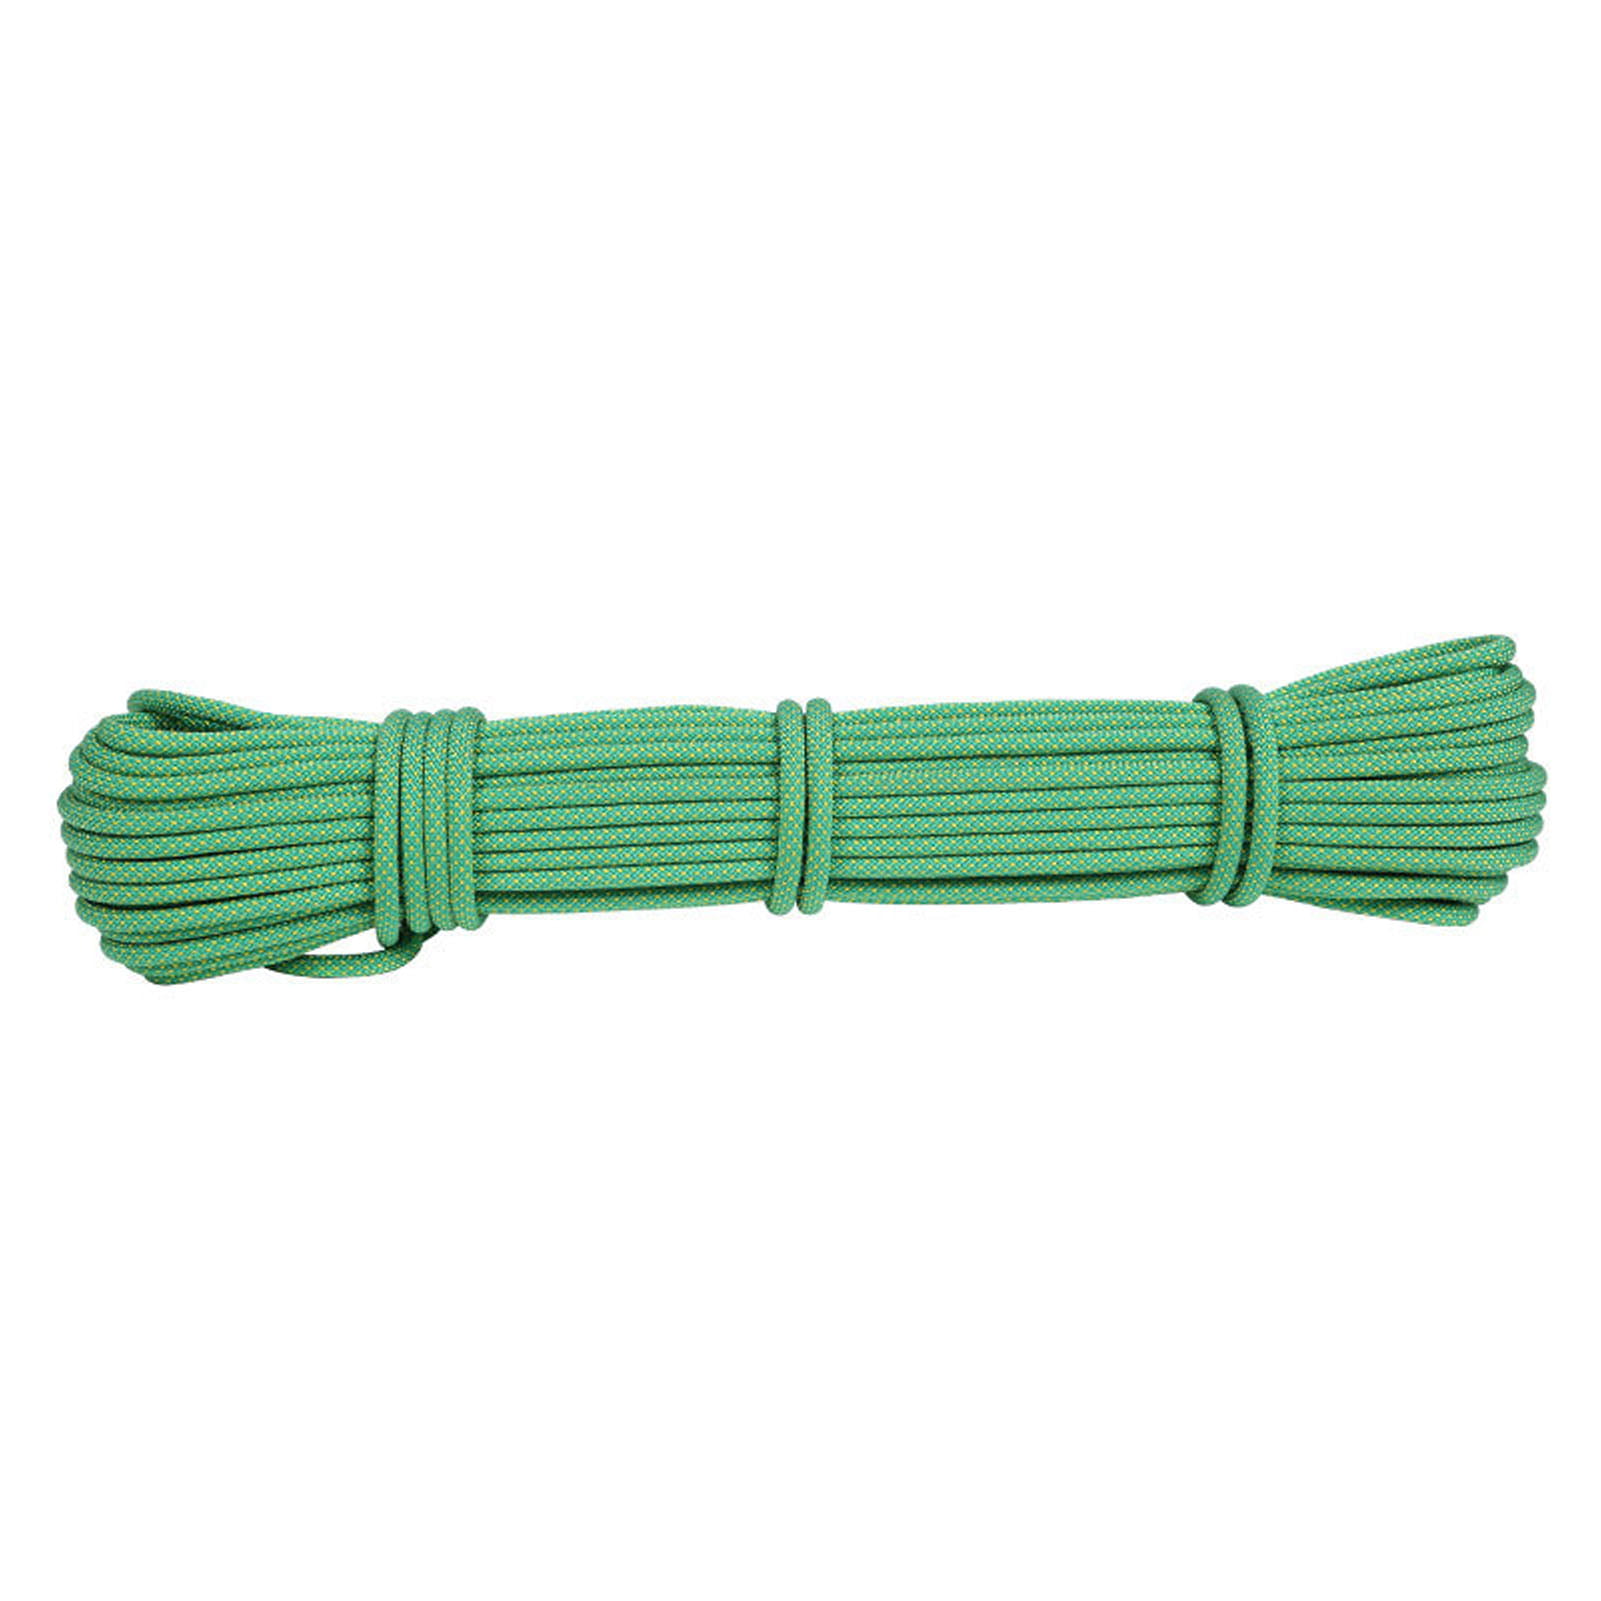 10M 6mm Climbing Auxiliary Rope Knots Cord for Mountaineering Arborist Camping 